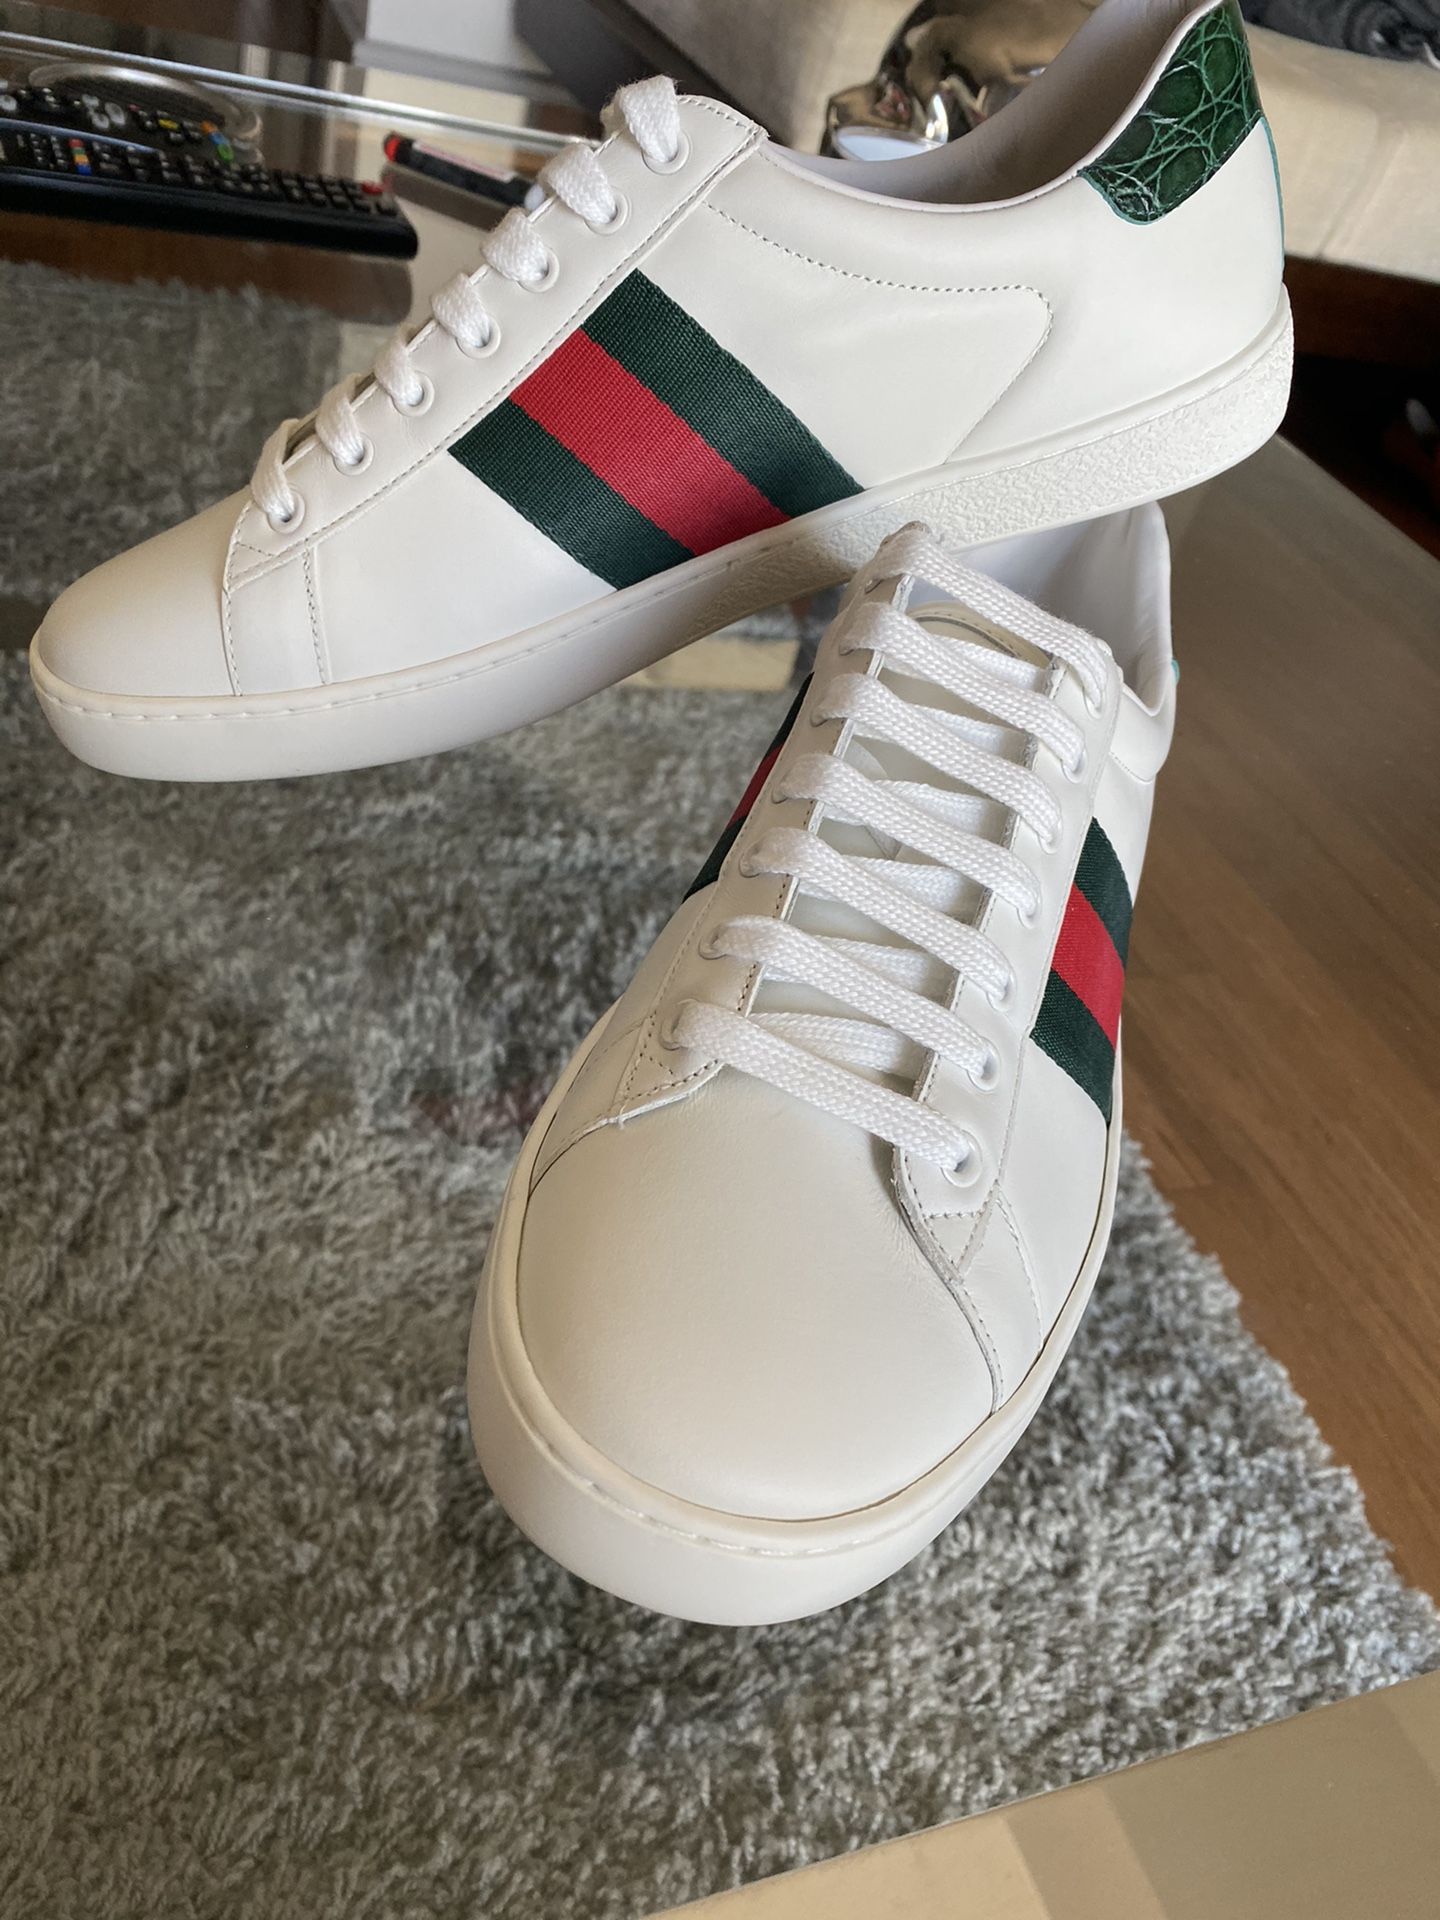 Gucci Ace Sneaker Size 10